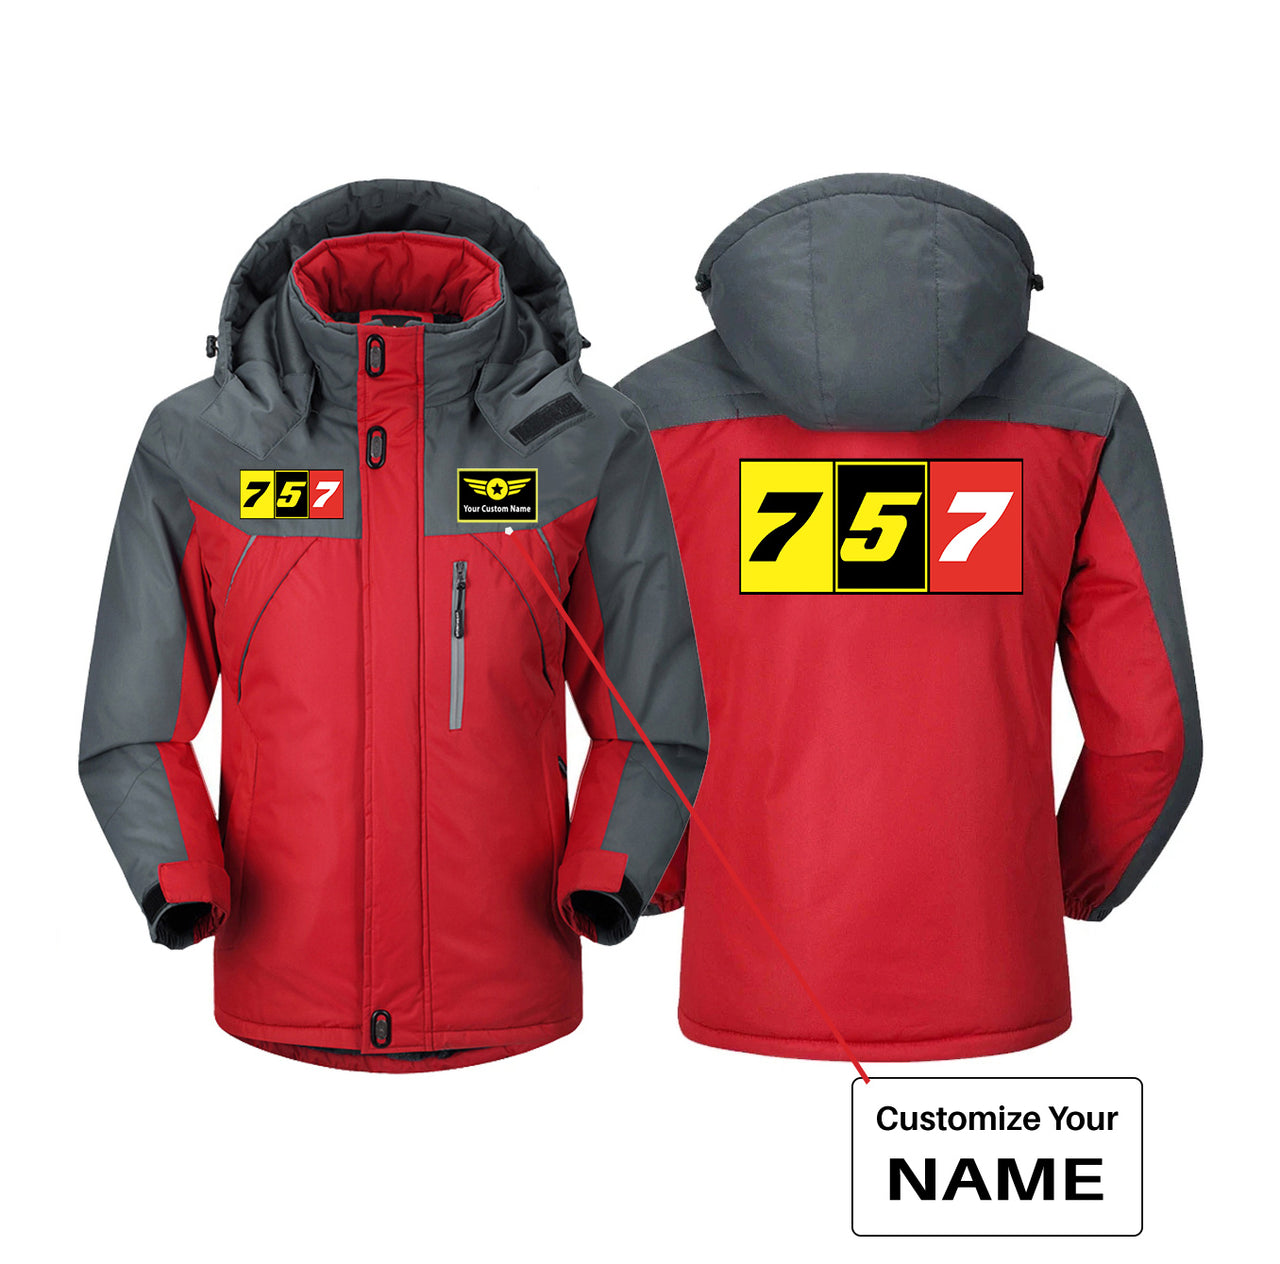 Flat Colourful 757 Designed Thick Winter Jackets